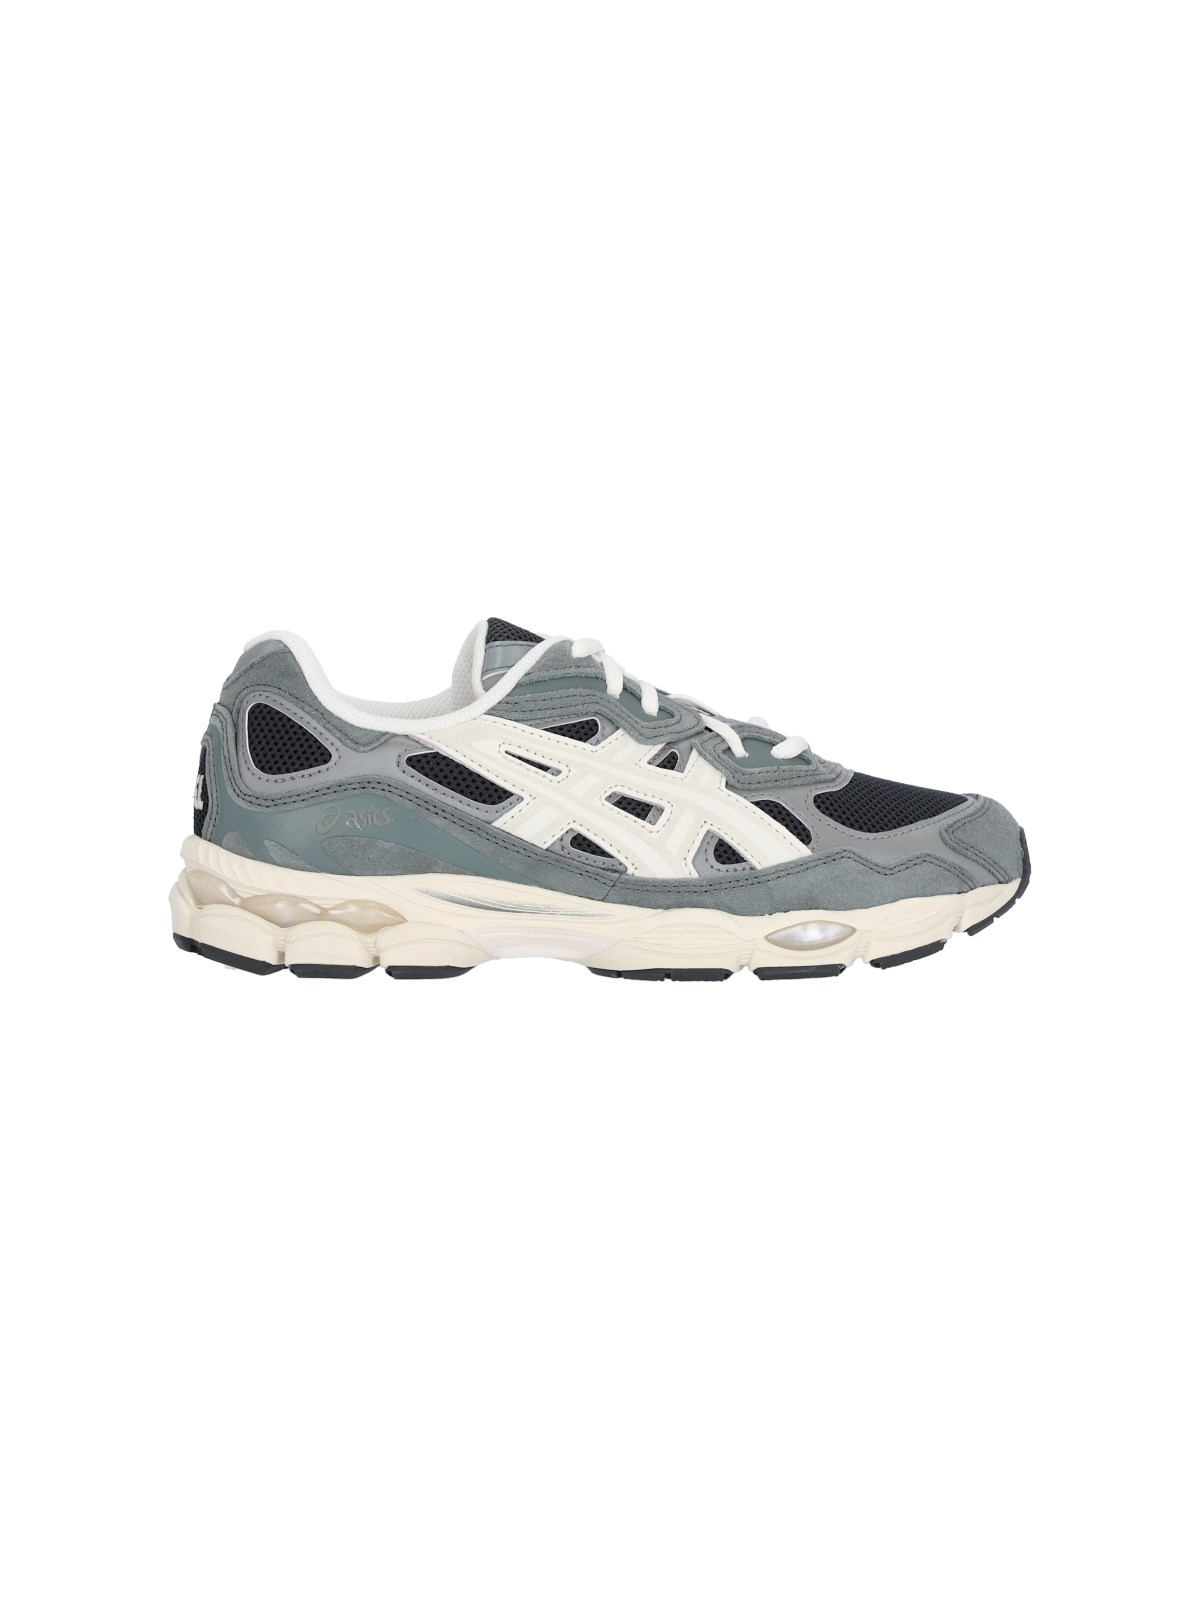 Asics 'gel-nyc' sneakers available on SUGAR - 155526